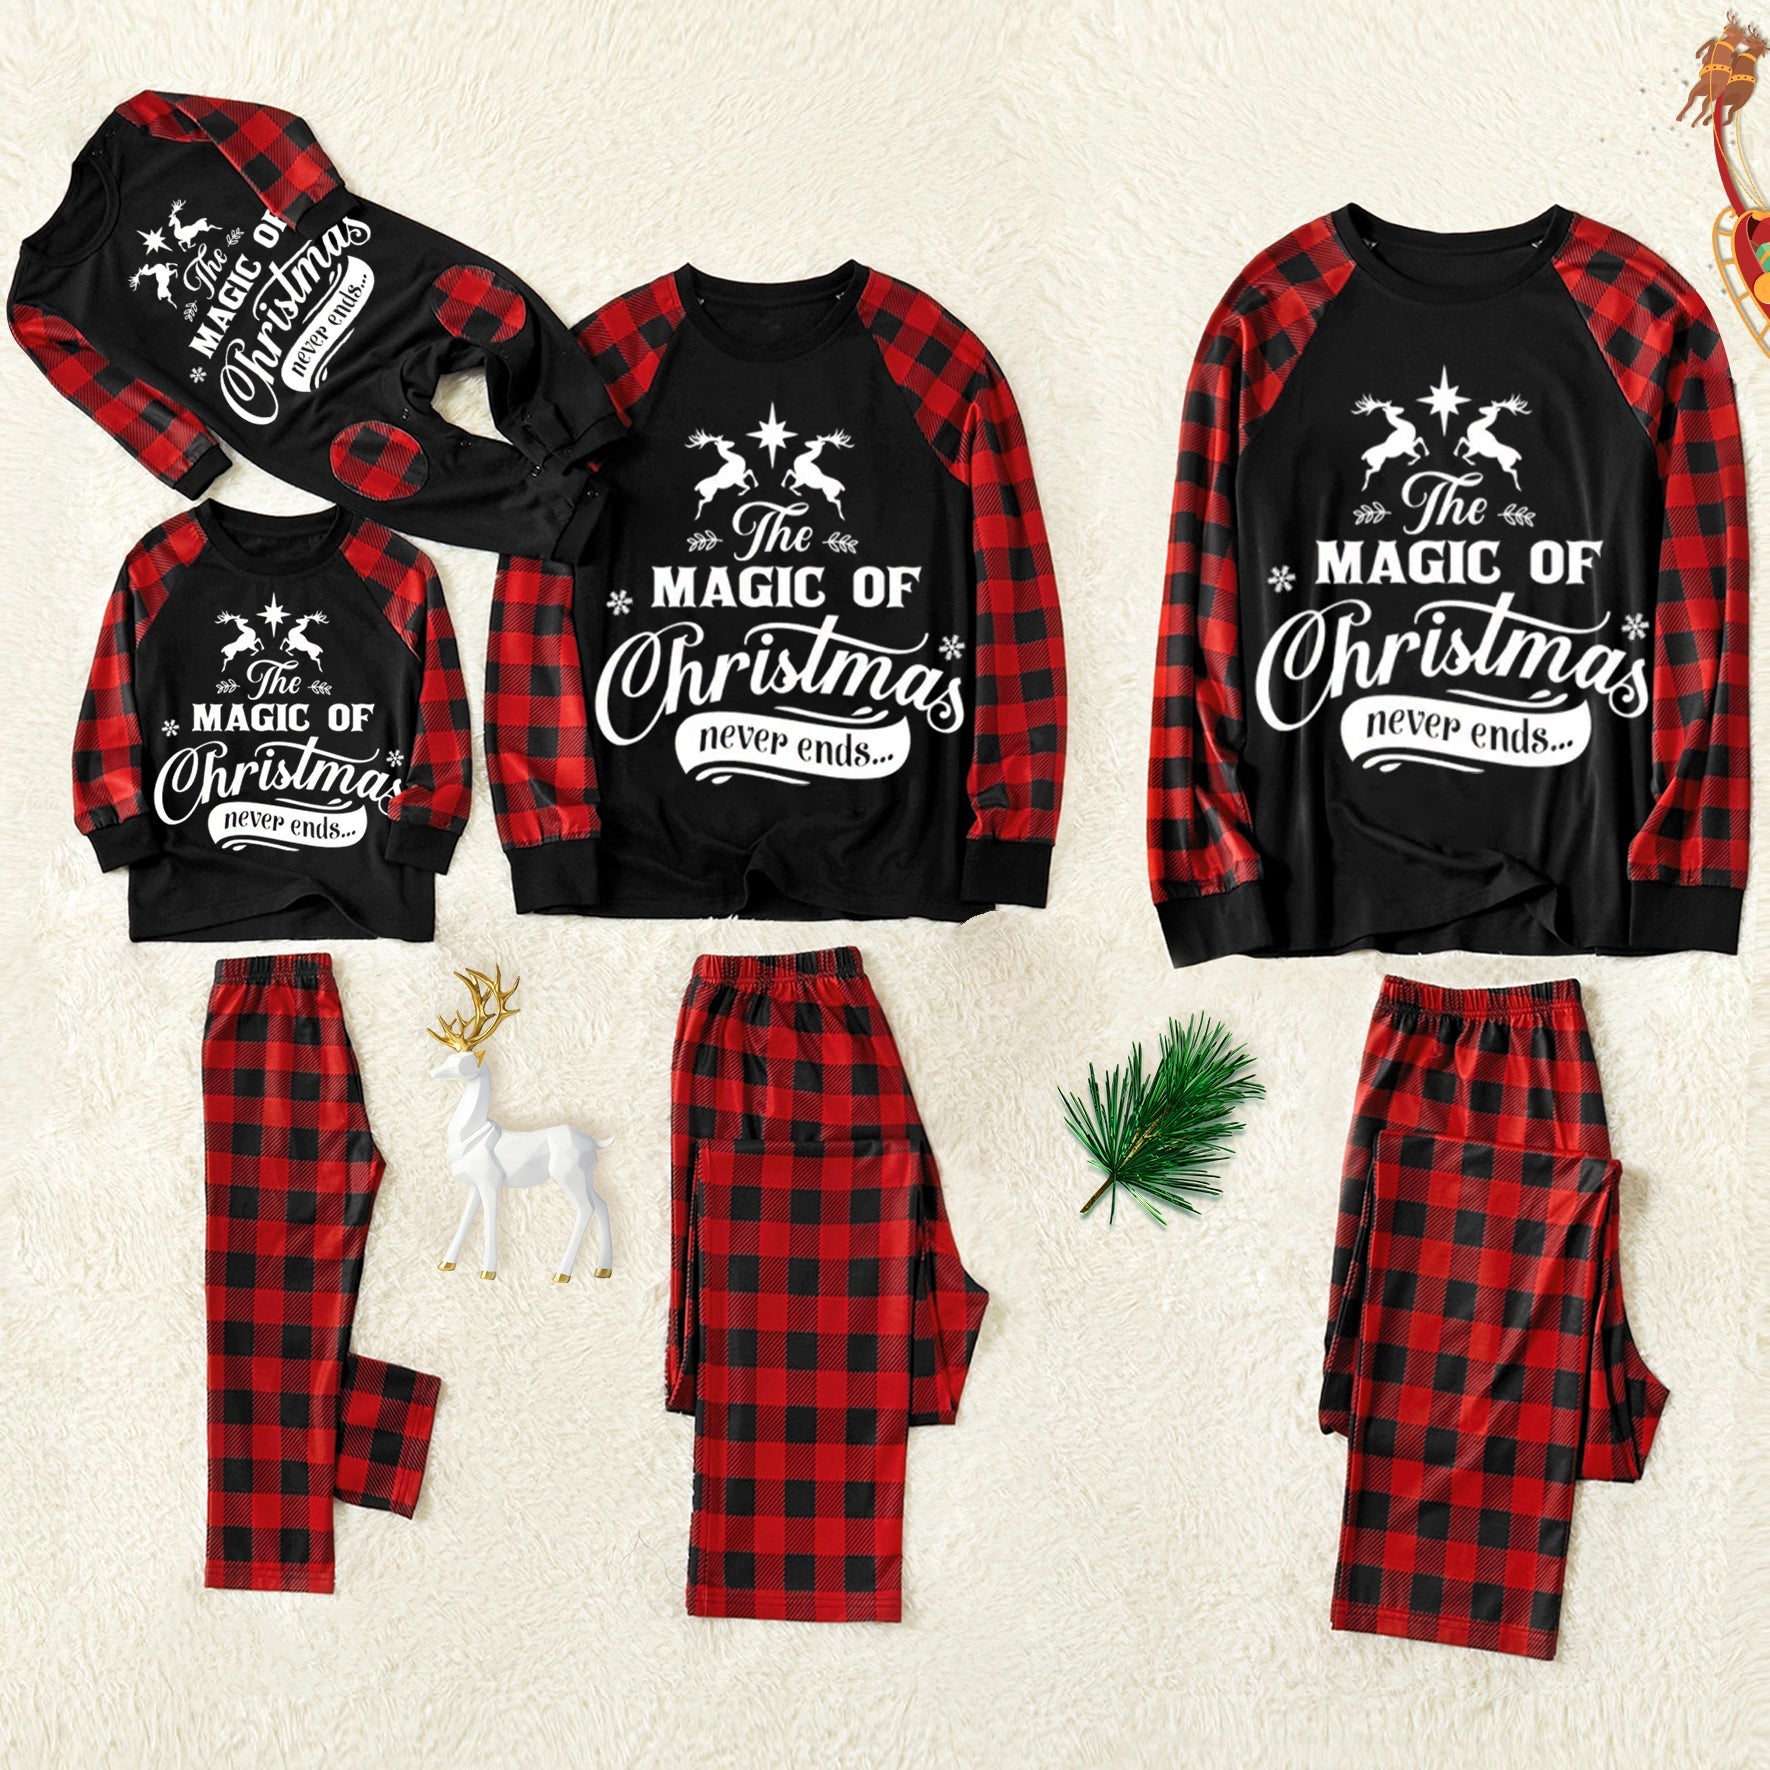 Christmas ‘The Maigc Of Christmas Never Ends...’ Letter Print Patterned Contrast Black top and Black & Red Plaid Pants Family Matching Pajamas Set